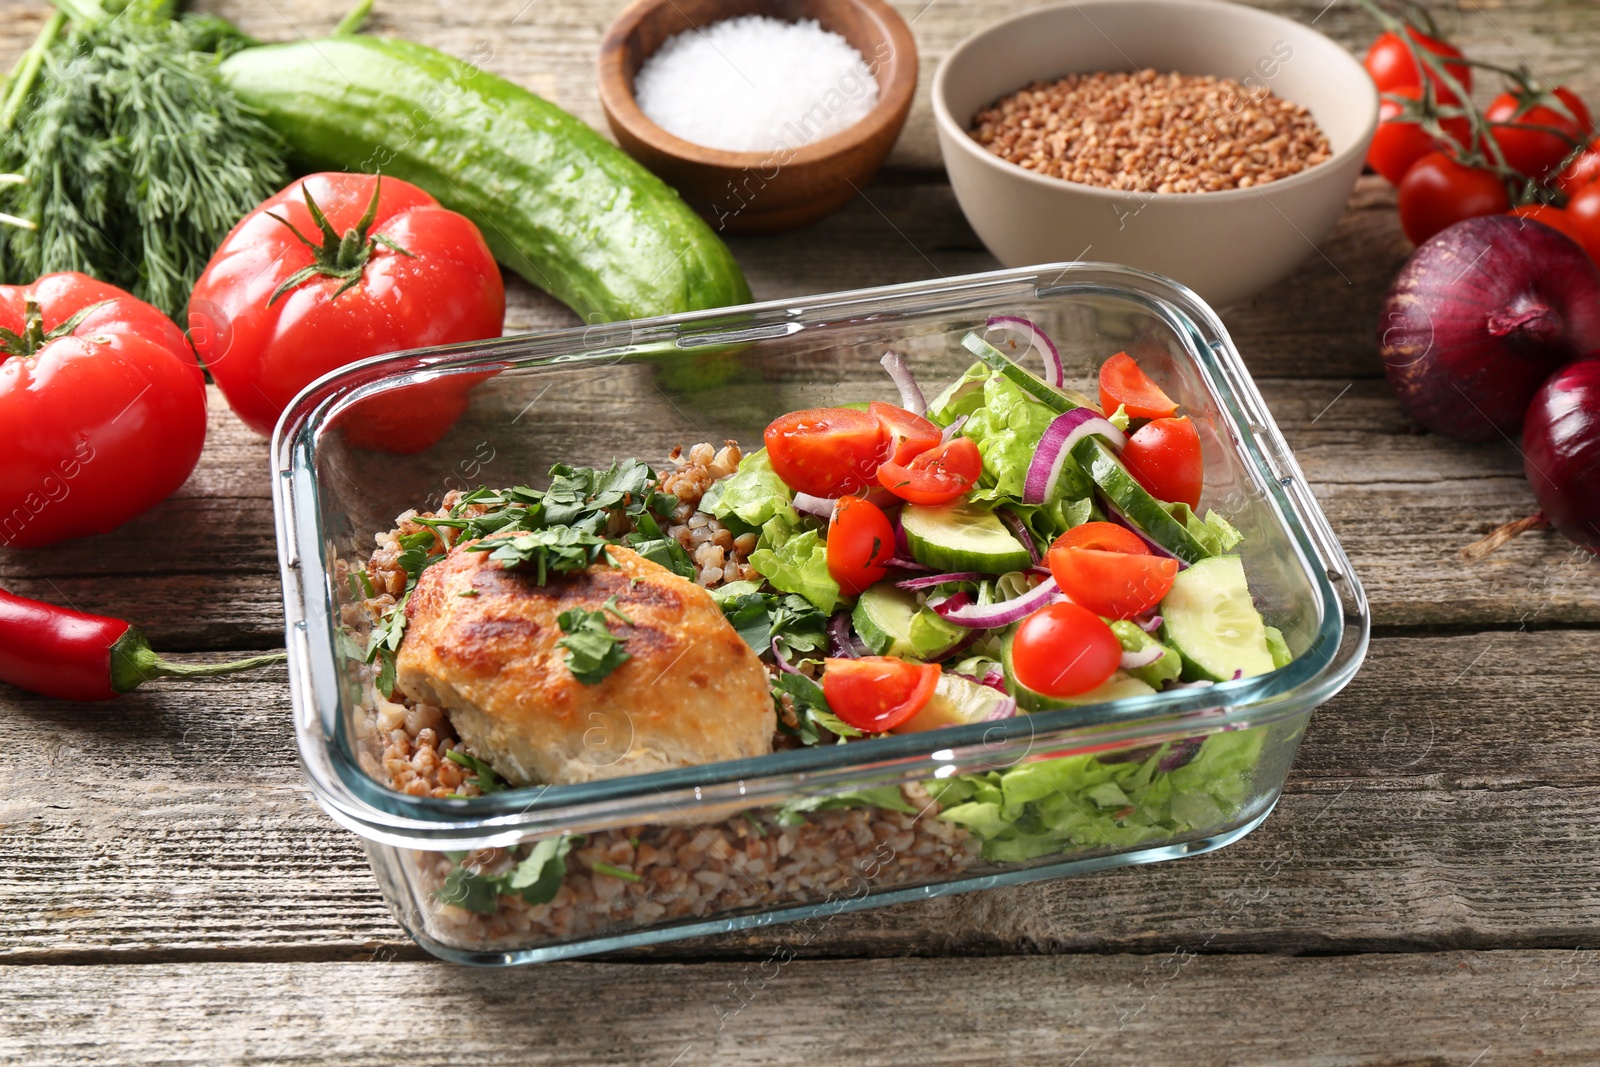 Photo of Healthy meal. Cutlet, buckwheat and salad in container near other products on wooden table